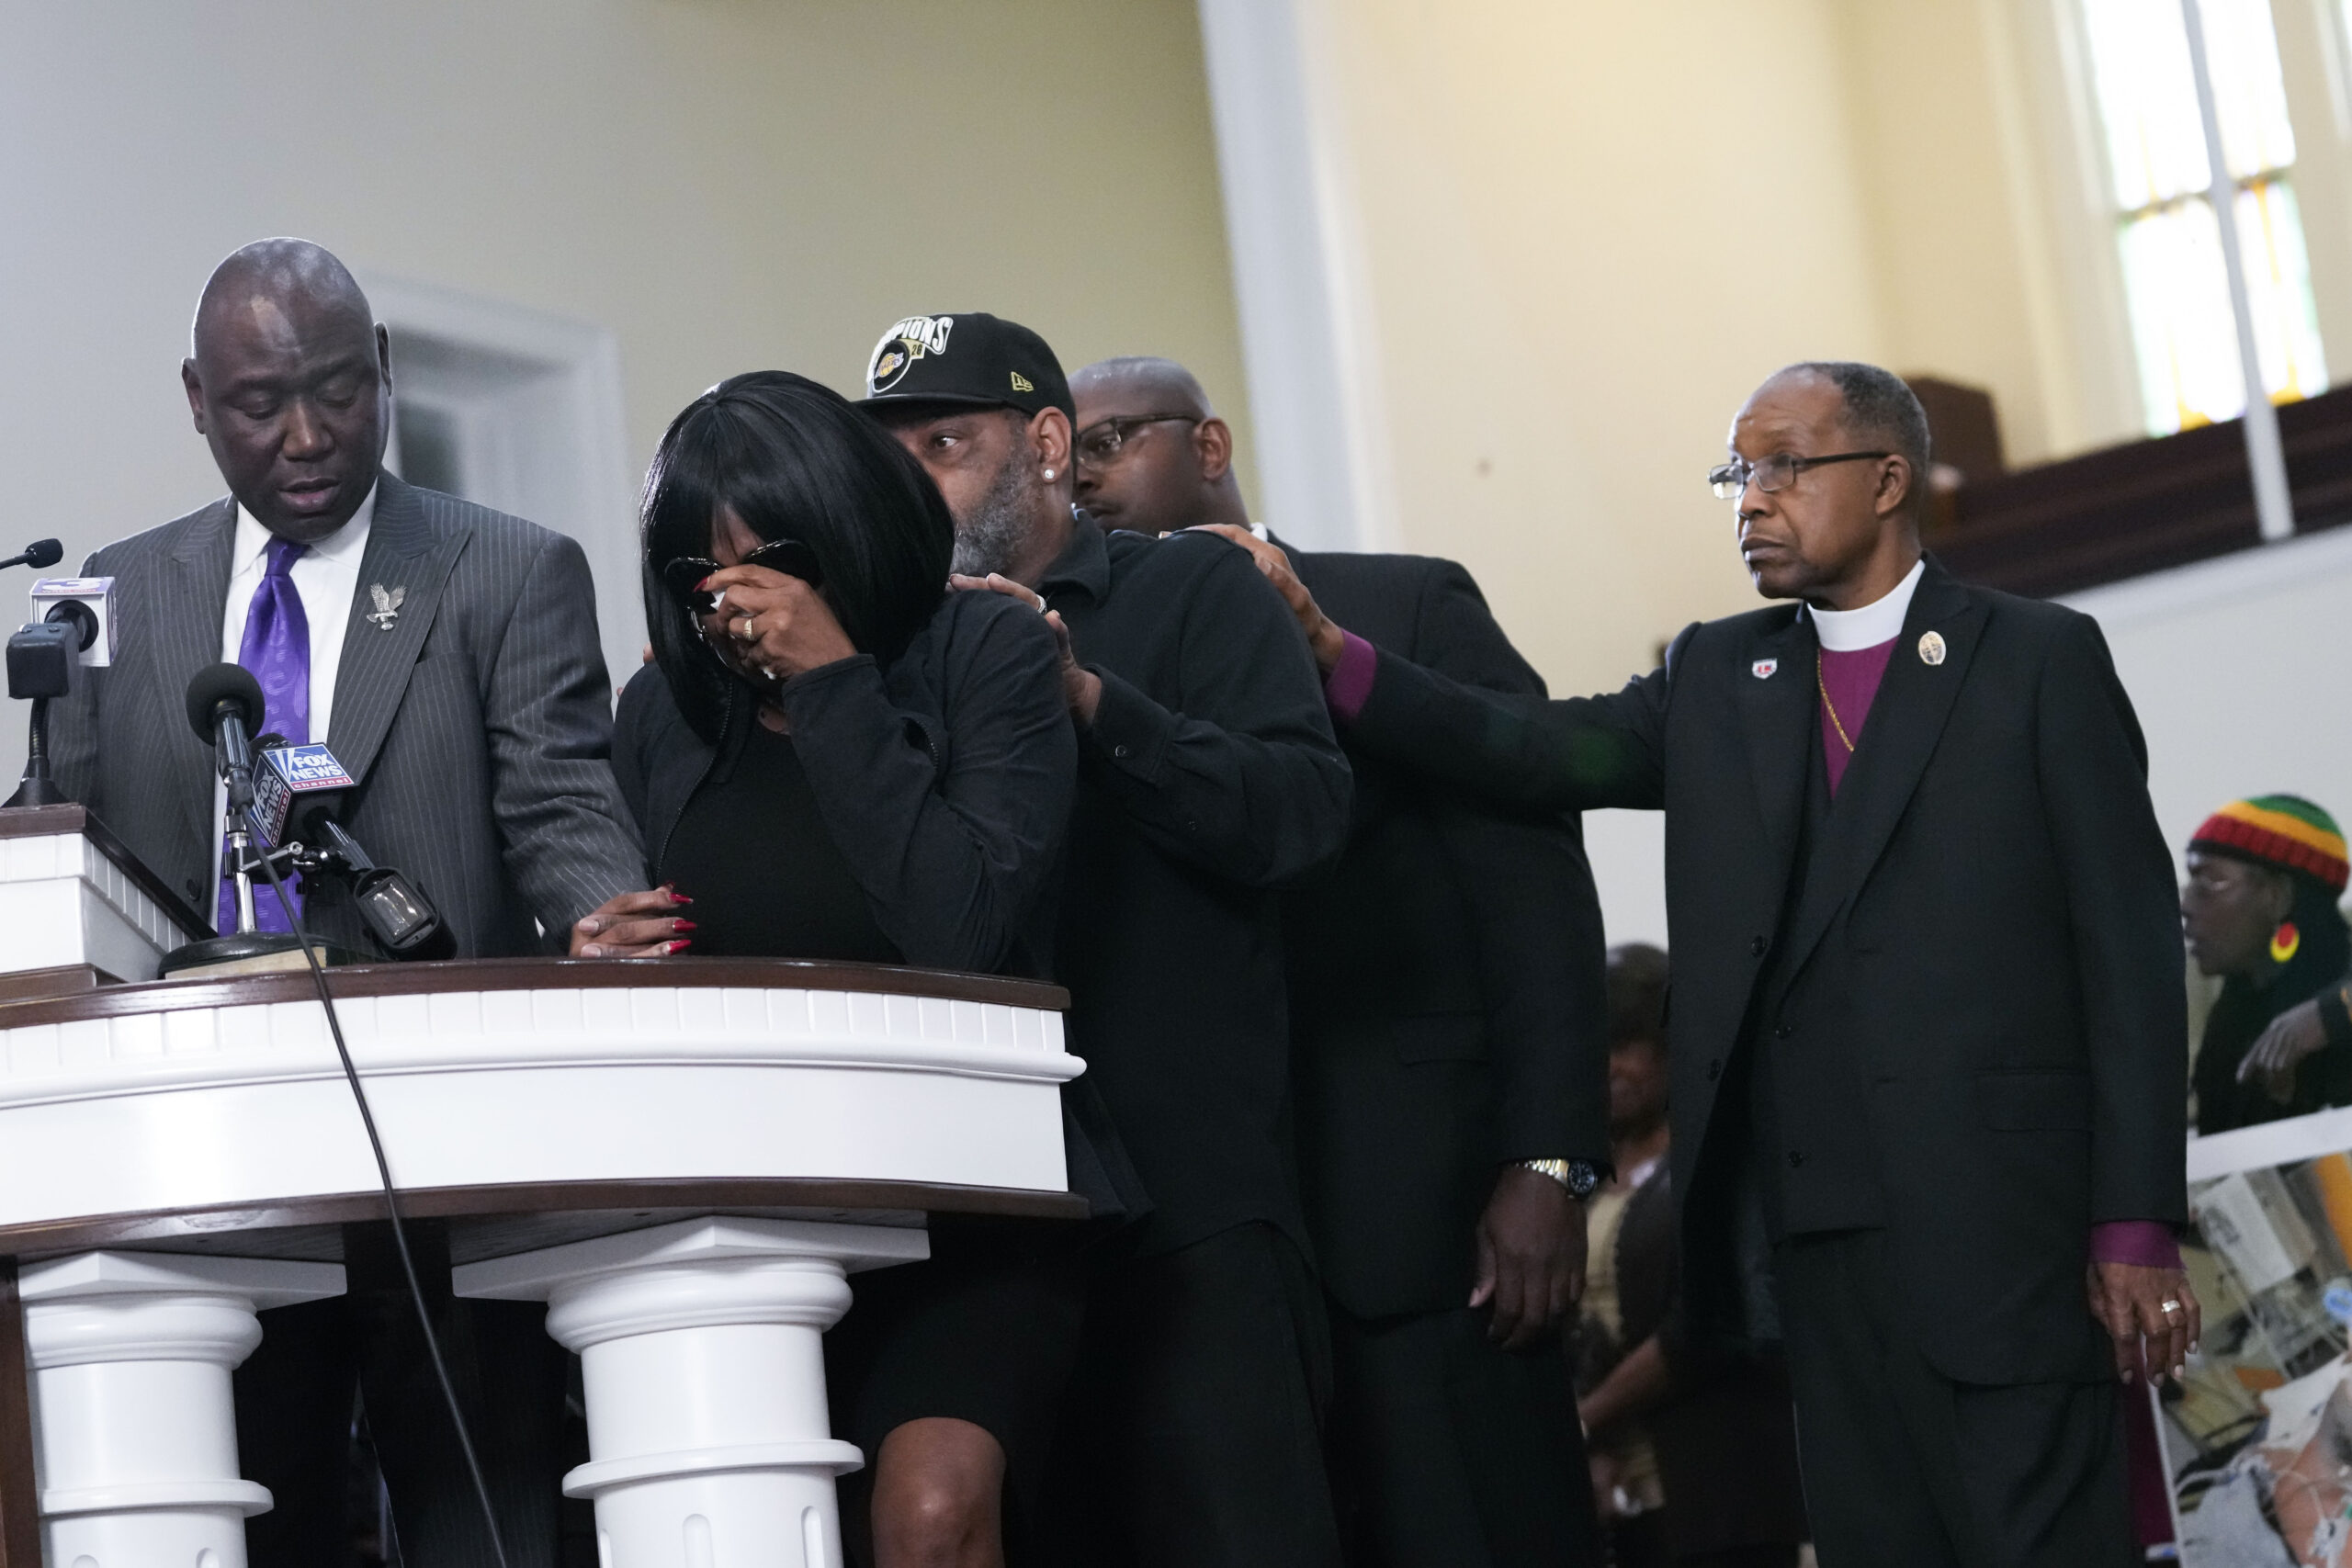 RowVaughn Wells, second from left, mother of Tyre Nichols, who died after being beaten by Memphis police officers, cries as she is comforted by Tyre's stepfather Rodney Wells, behind her, at a news conference with civil rights Attorney Ben Crump, left, in Memphis, Tenn., Monday, Jan. 23, 2023. Far right is Bishop Henry Williamson. Photo credit:Gerald Herbert, The Associated Press